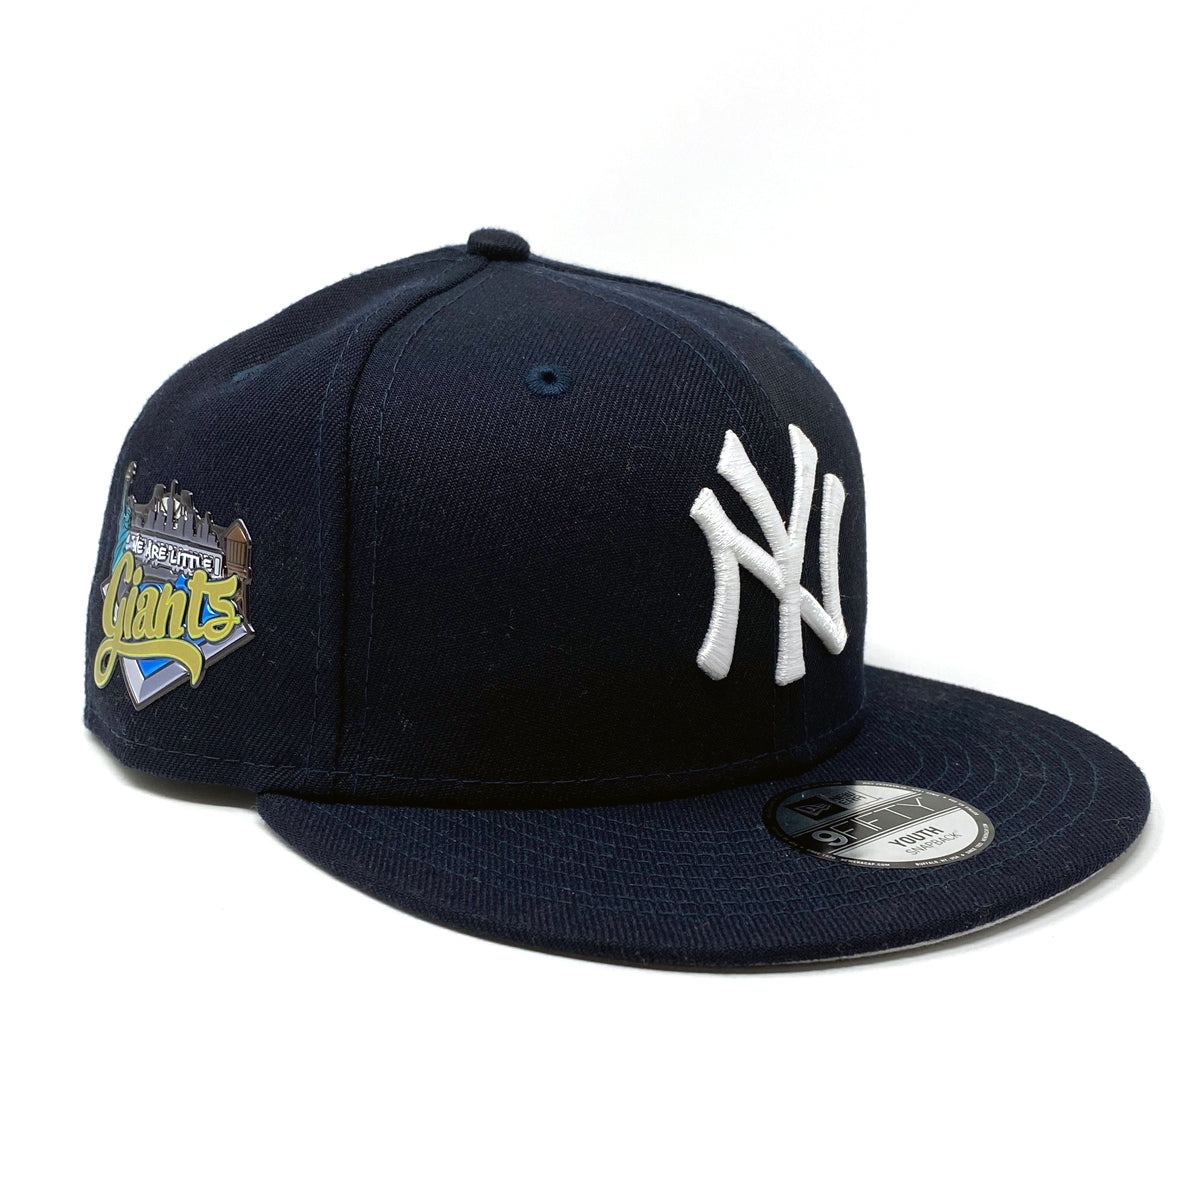 NY Yankees LG Side Patch SnapBack Hat